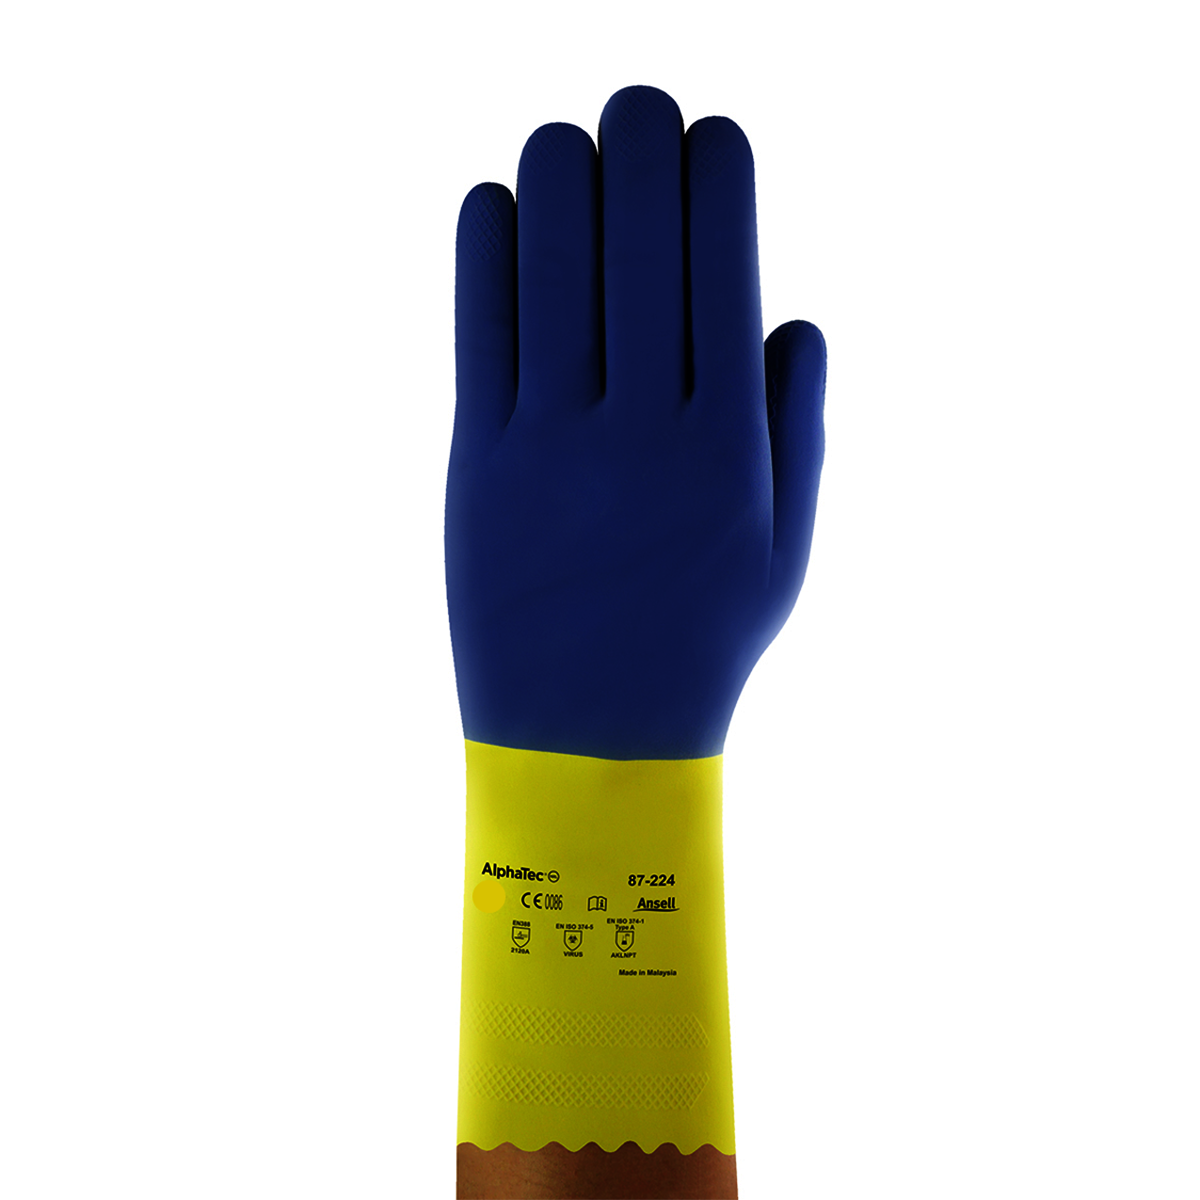 Ansell Size 7 Blue Over Yellow Chemi-Pro 13 Cotton Flock Lined 27 mil Unsupported Neoprene Natural Rubber Latex Heavy Duty Chemical Resistant Gloves With Recessed Diamond Embossed Finish And Pinked Cuff